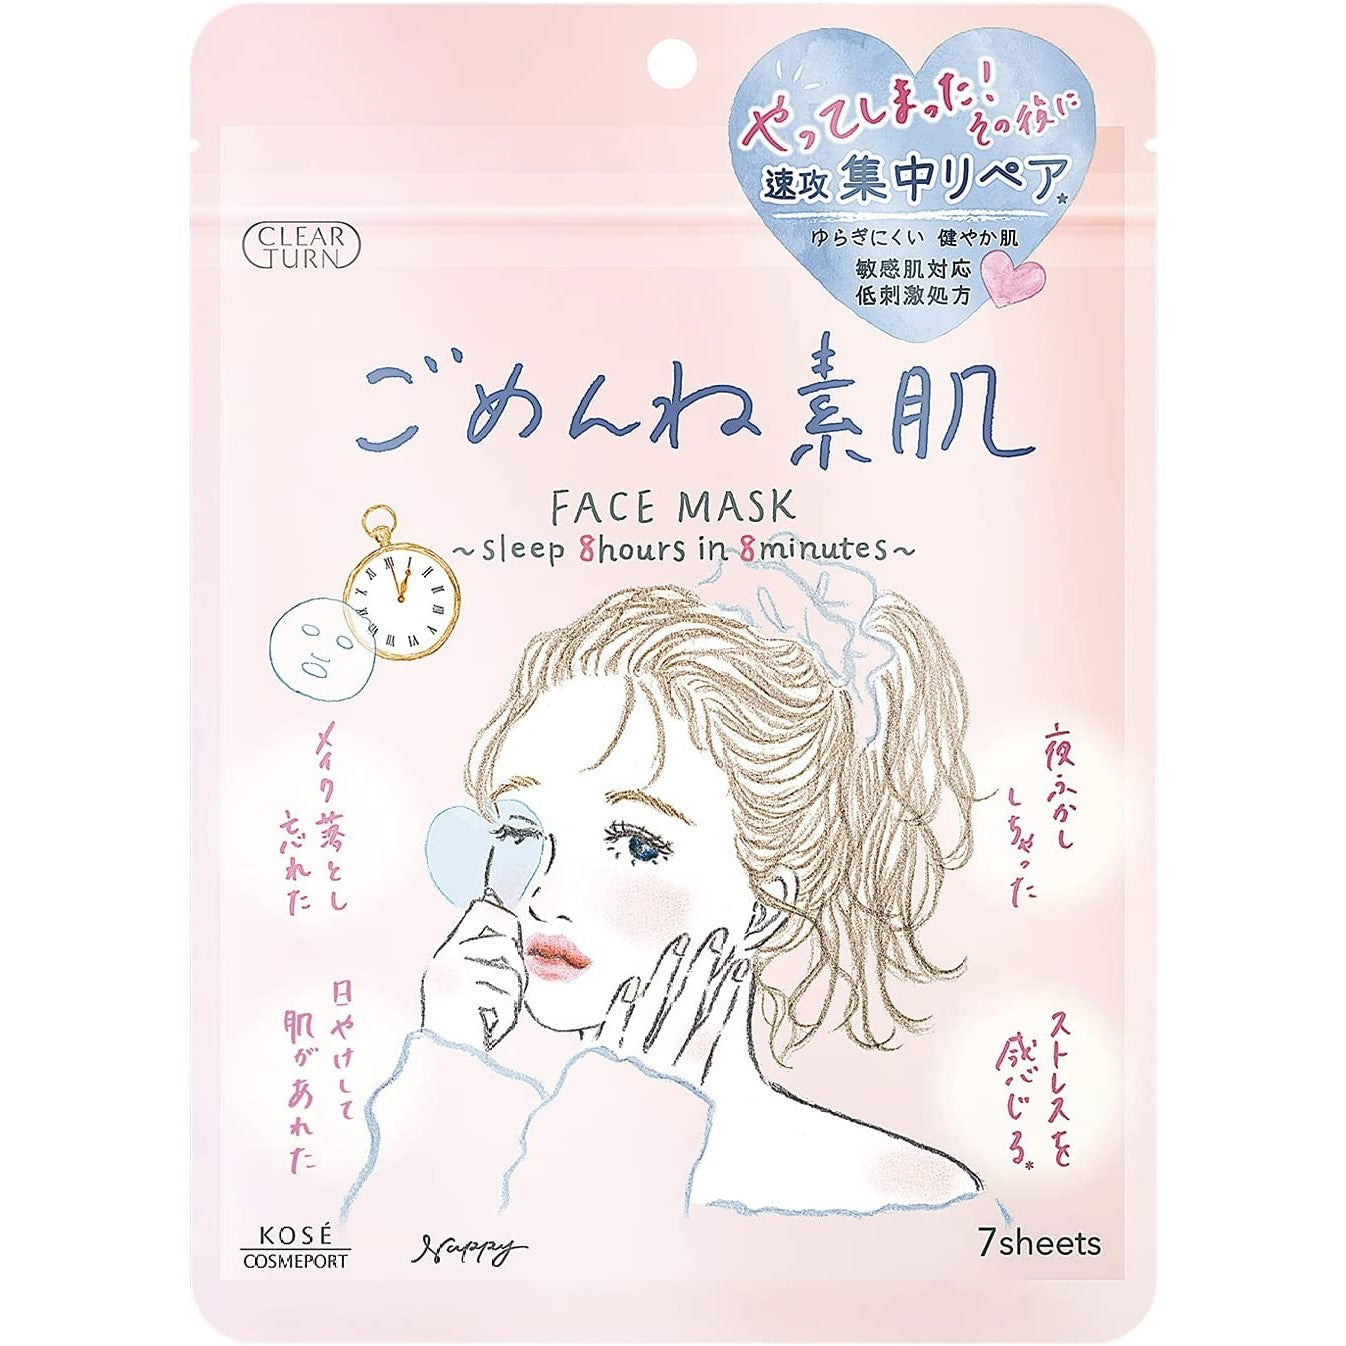 Kose Clear Turn Sorry Bare Skin Face Mask 7pcs (Made in Japan)